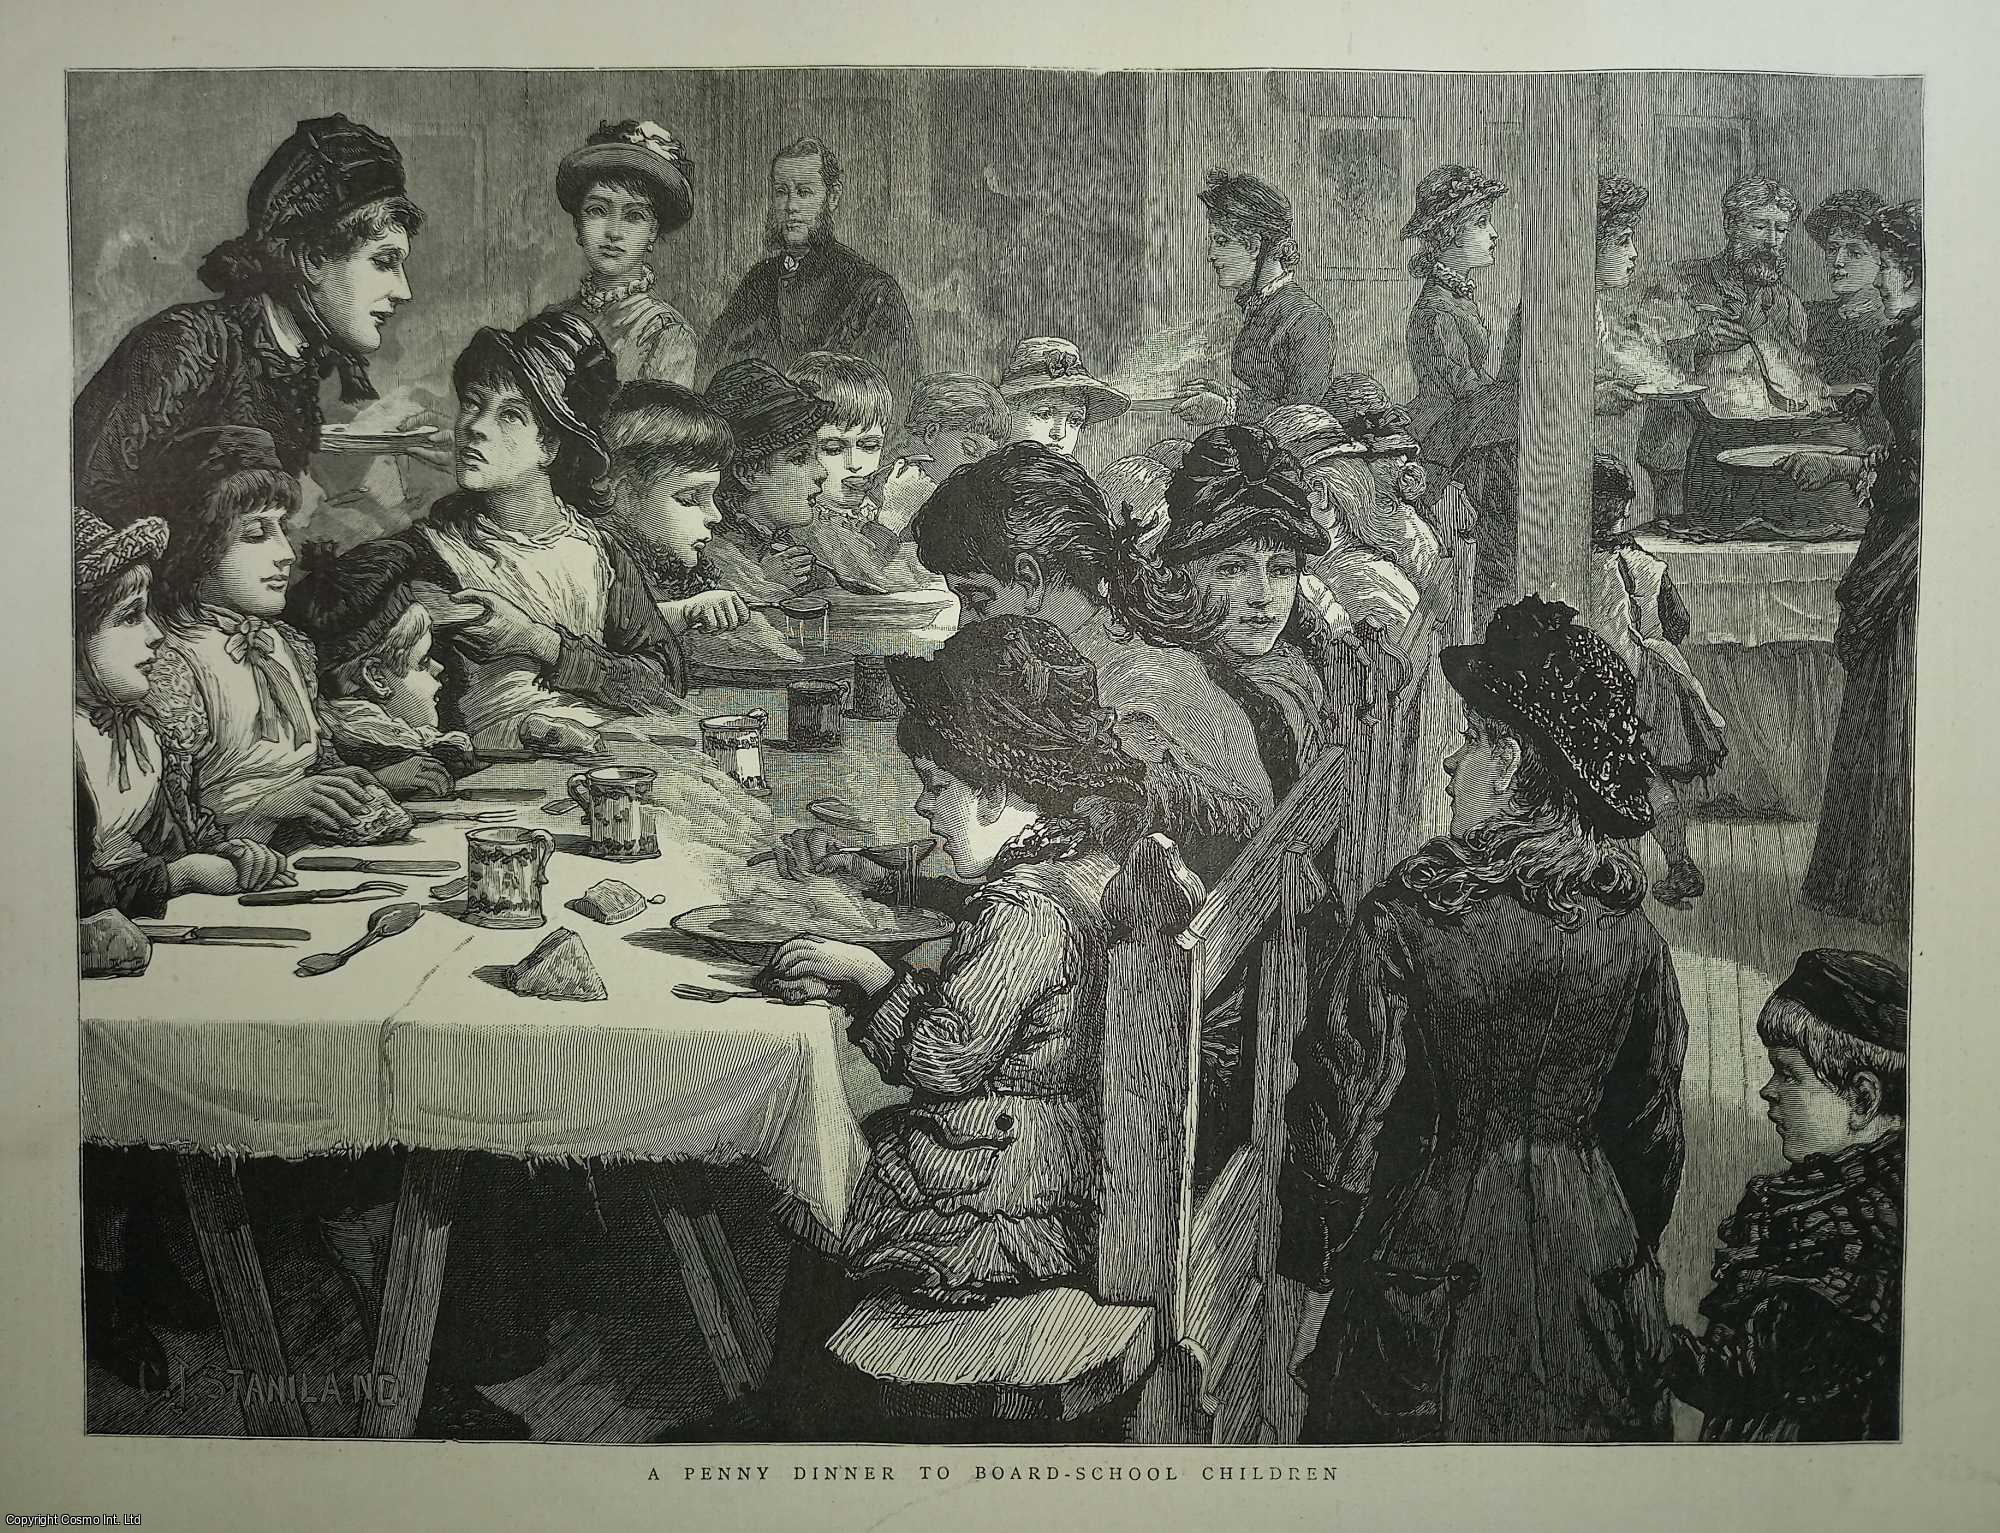 C.J. Staniland, artist - A Penny Dinner to Board School Children. An original print from the Graphic Illustrated Weekly Magazine, 1885.